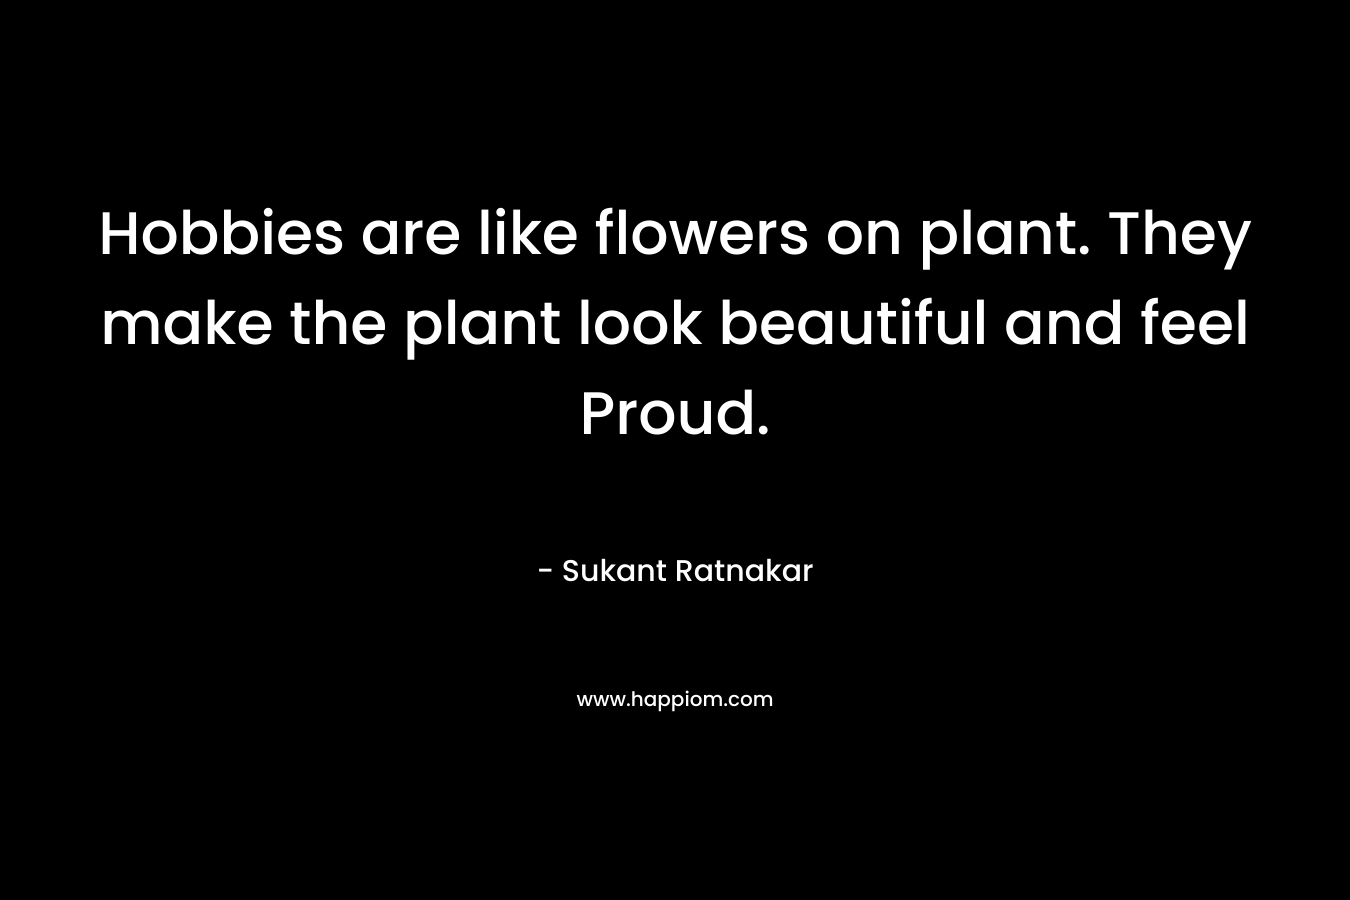 Hobbies are like flowers on plant. They make the plant look beautiful and feel Proud. – Sukant Ratnakar